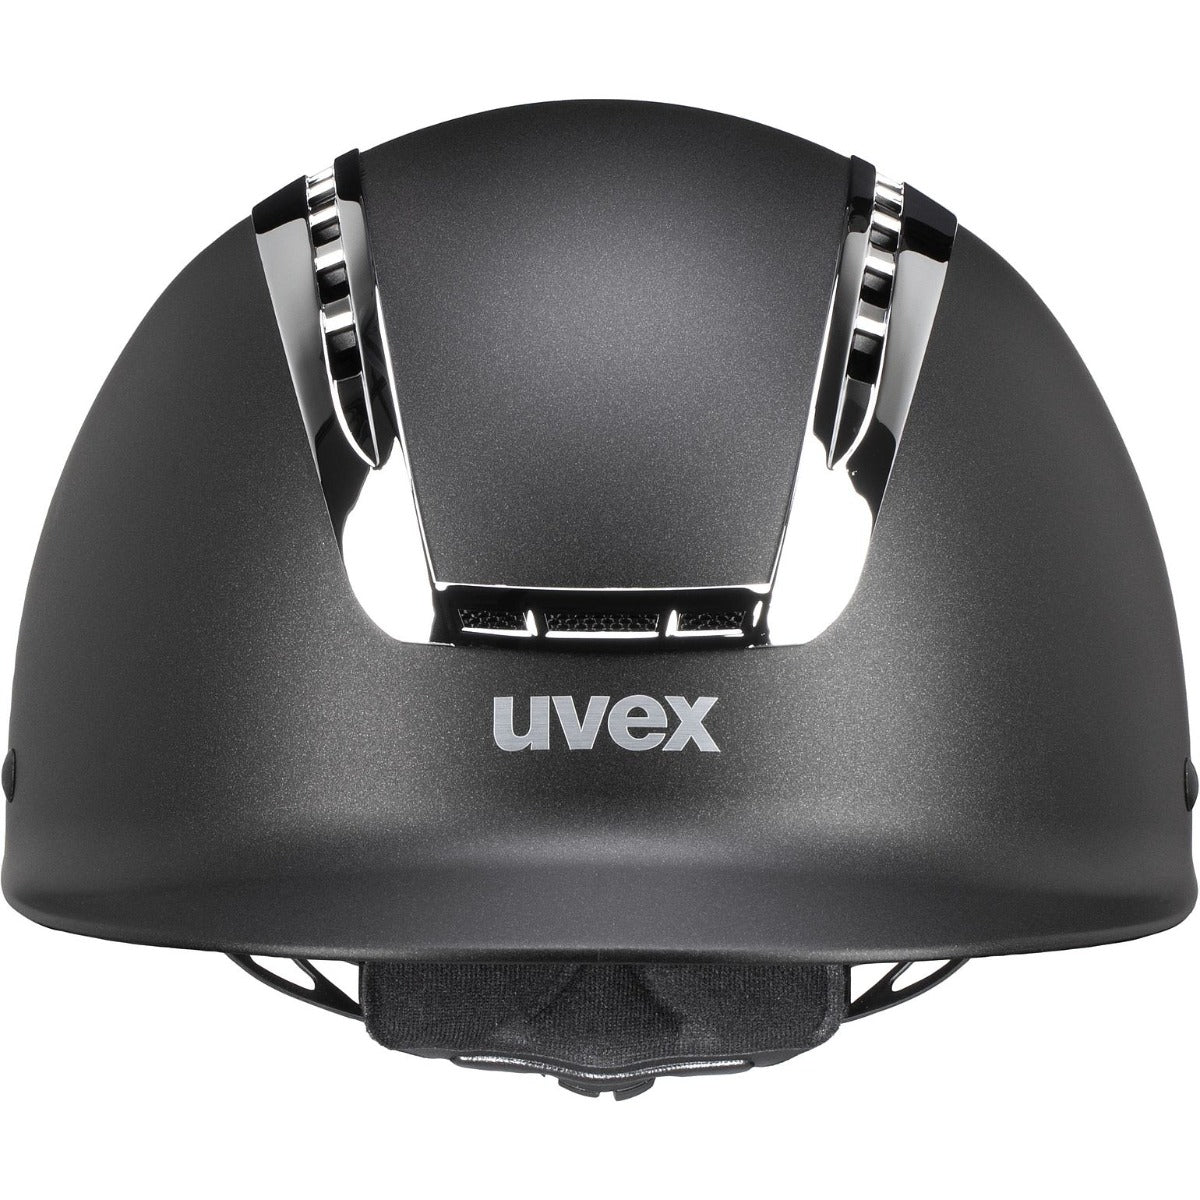 Uvex Suxxeed Chrome Riding Hat